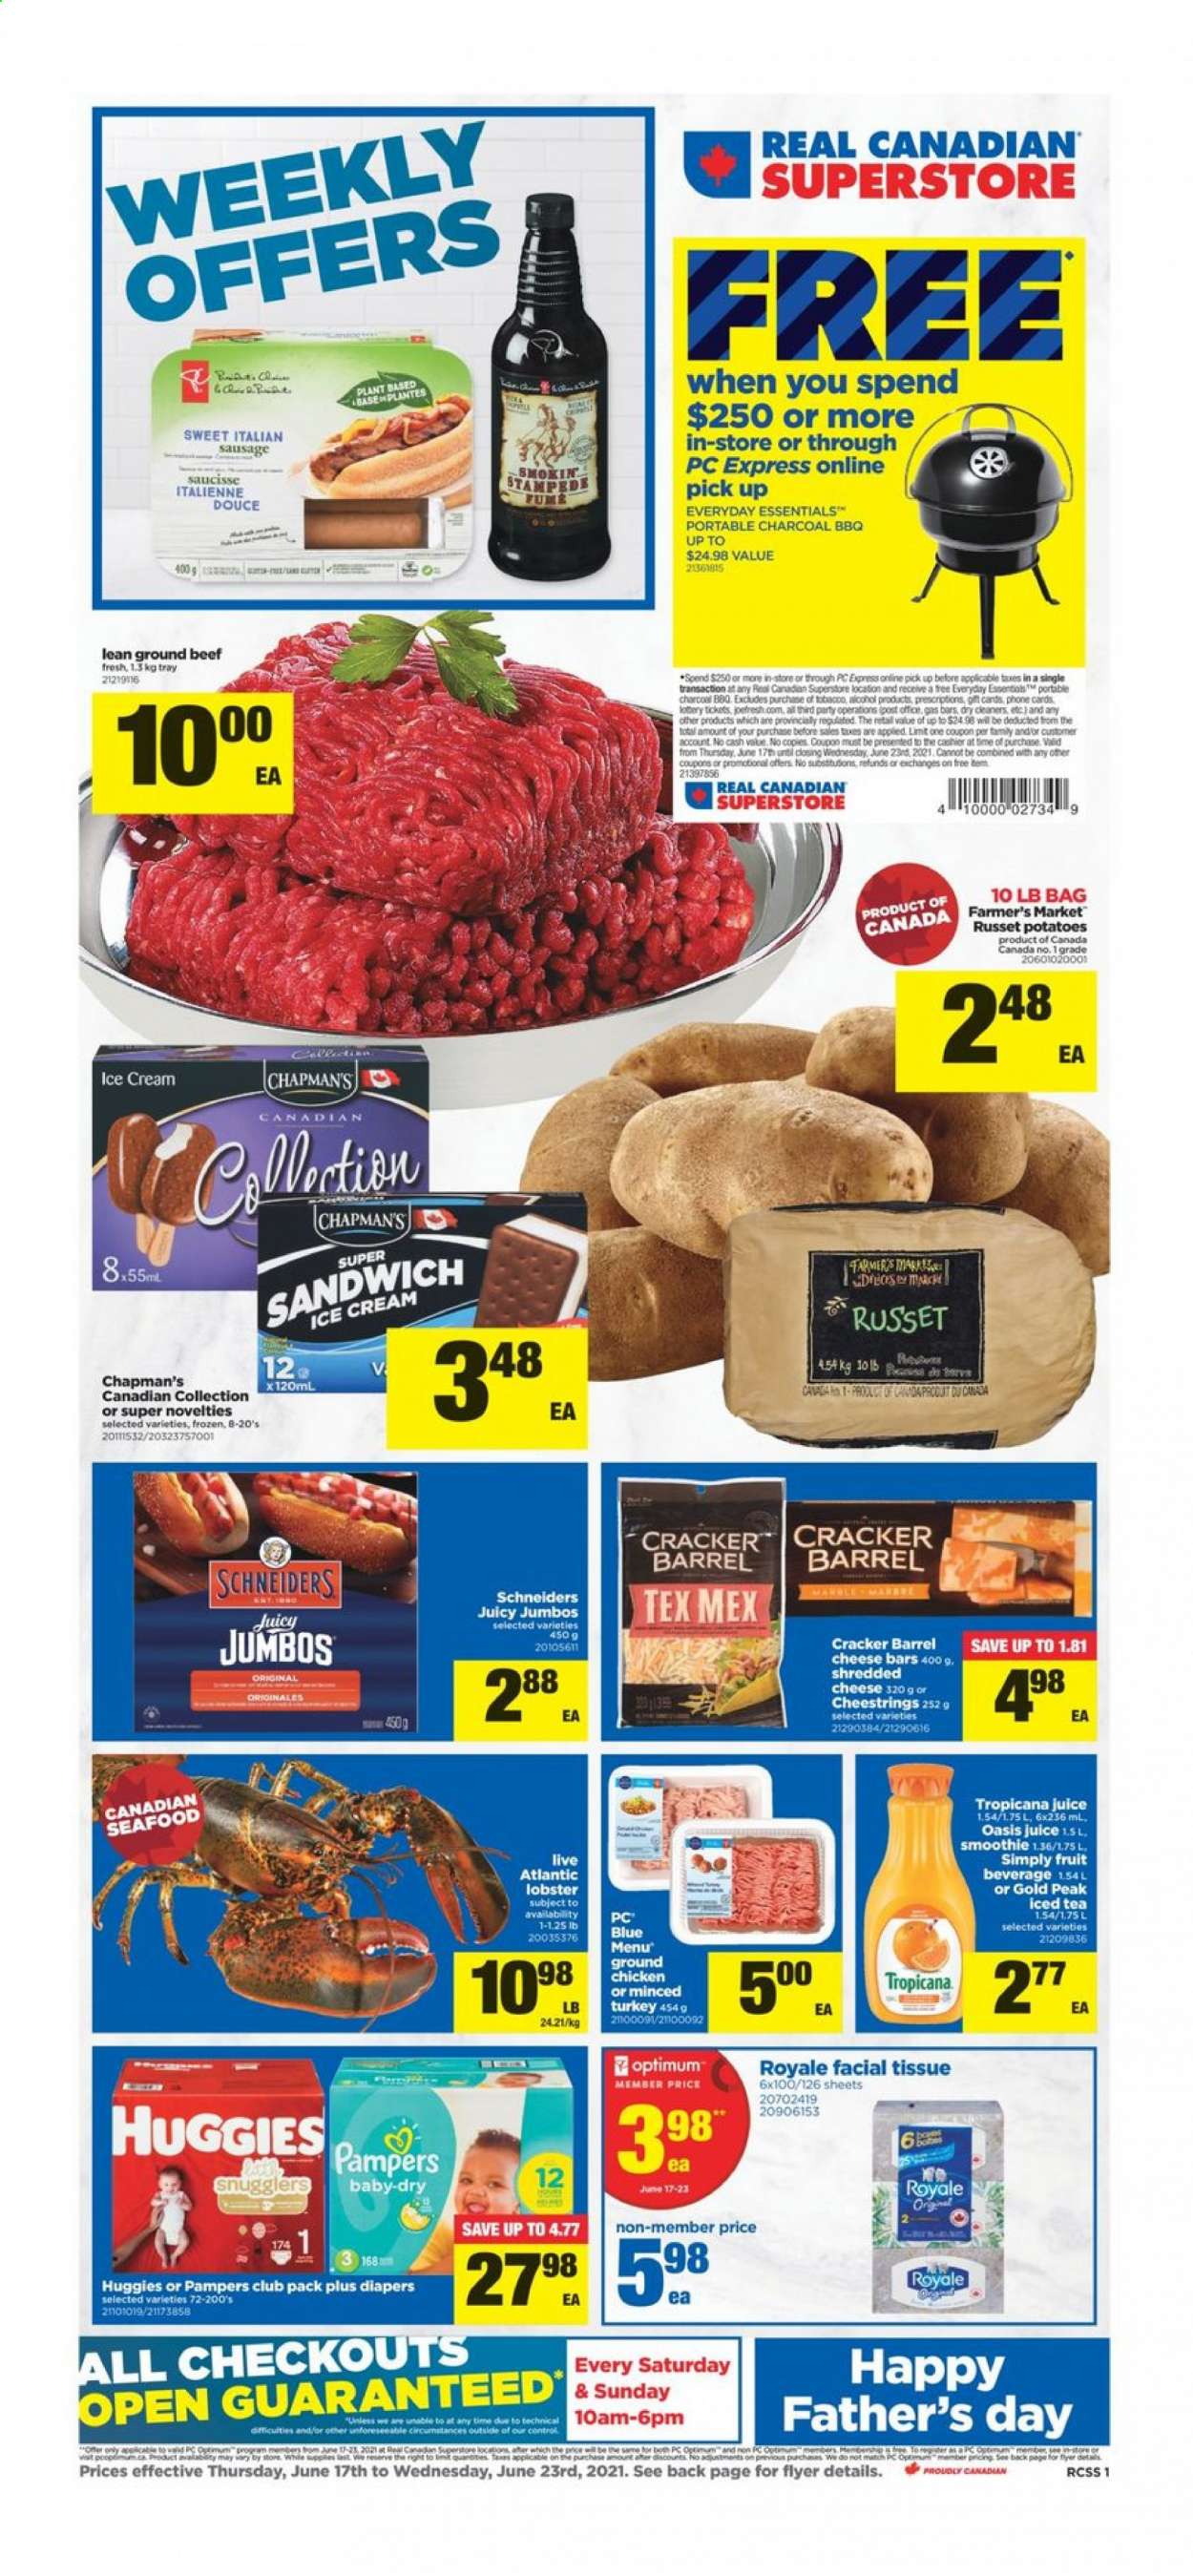 thumbnail - Real Canadian Superstore Flyer - June 17, 2021 - June 23, 2021 - Sales products - russet potatoes, potatoes, lobster, seafood, sandwich, sausage, italian sausage, shredded cheese, string cheese, ice cream, crackers, juice, ice tea, smoothie, alcohol, ground chicken, chicken, beef meat, ground beef, nappies, tissues, tray, Optimum, charcoal, Huggies, Pampers. Page 1.